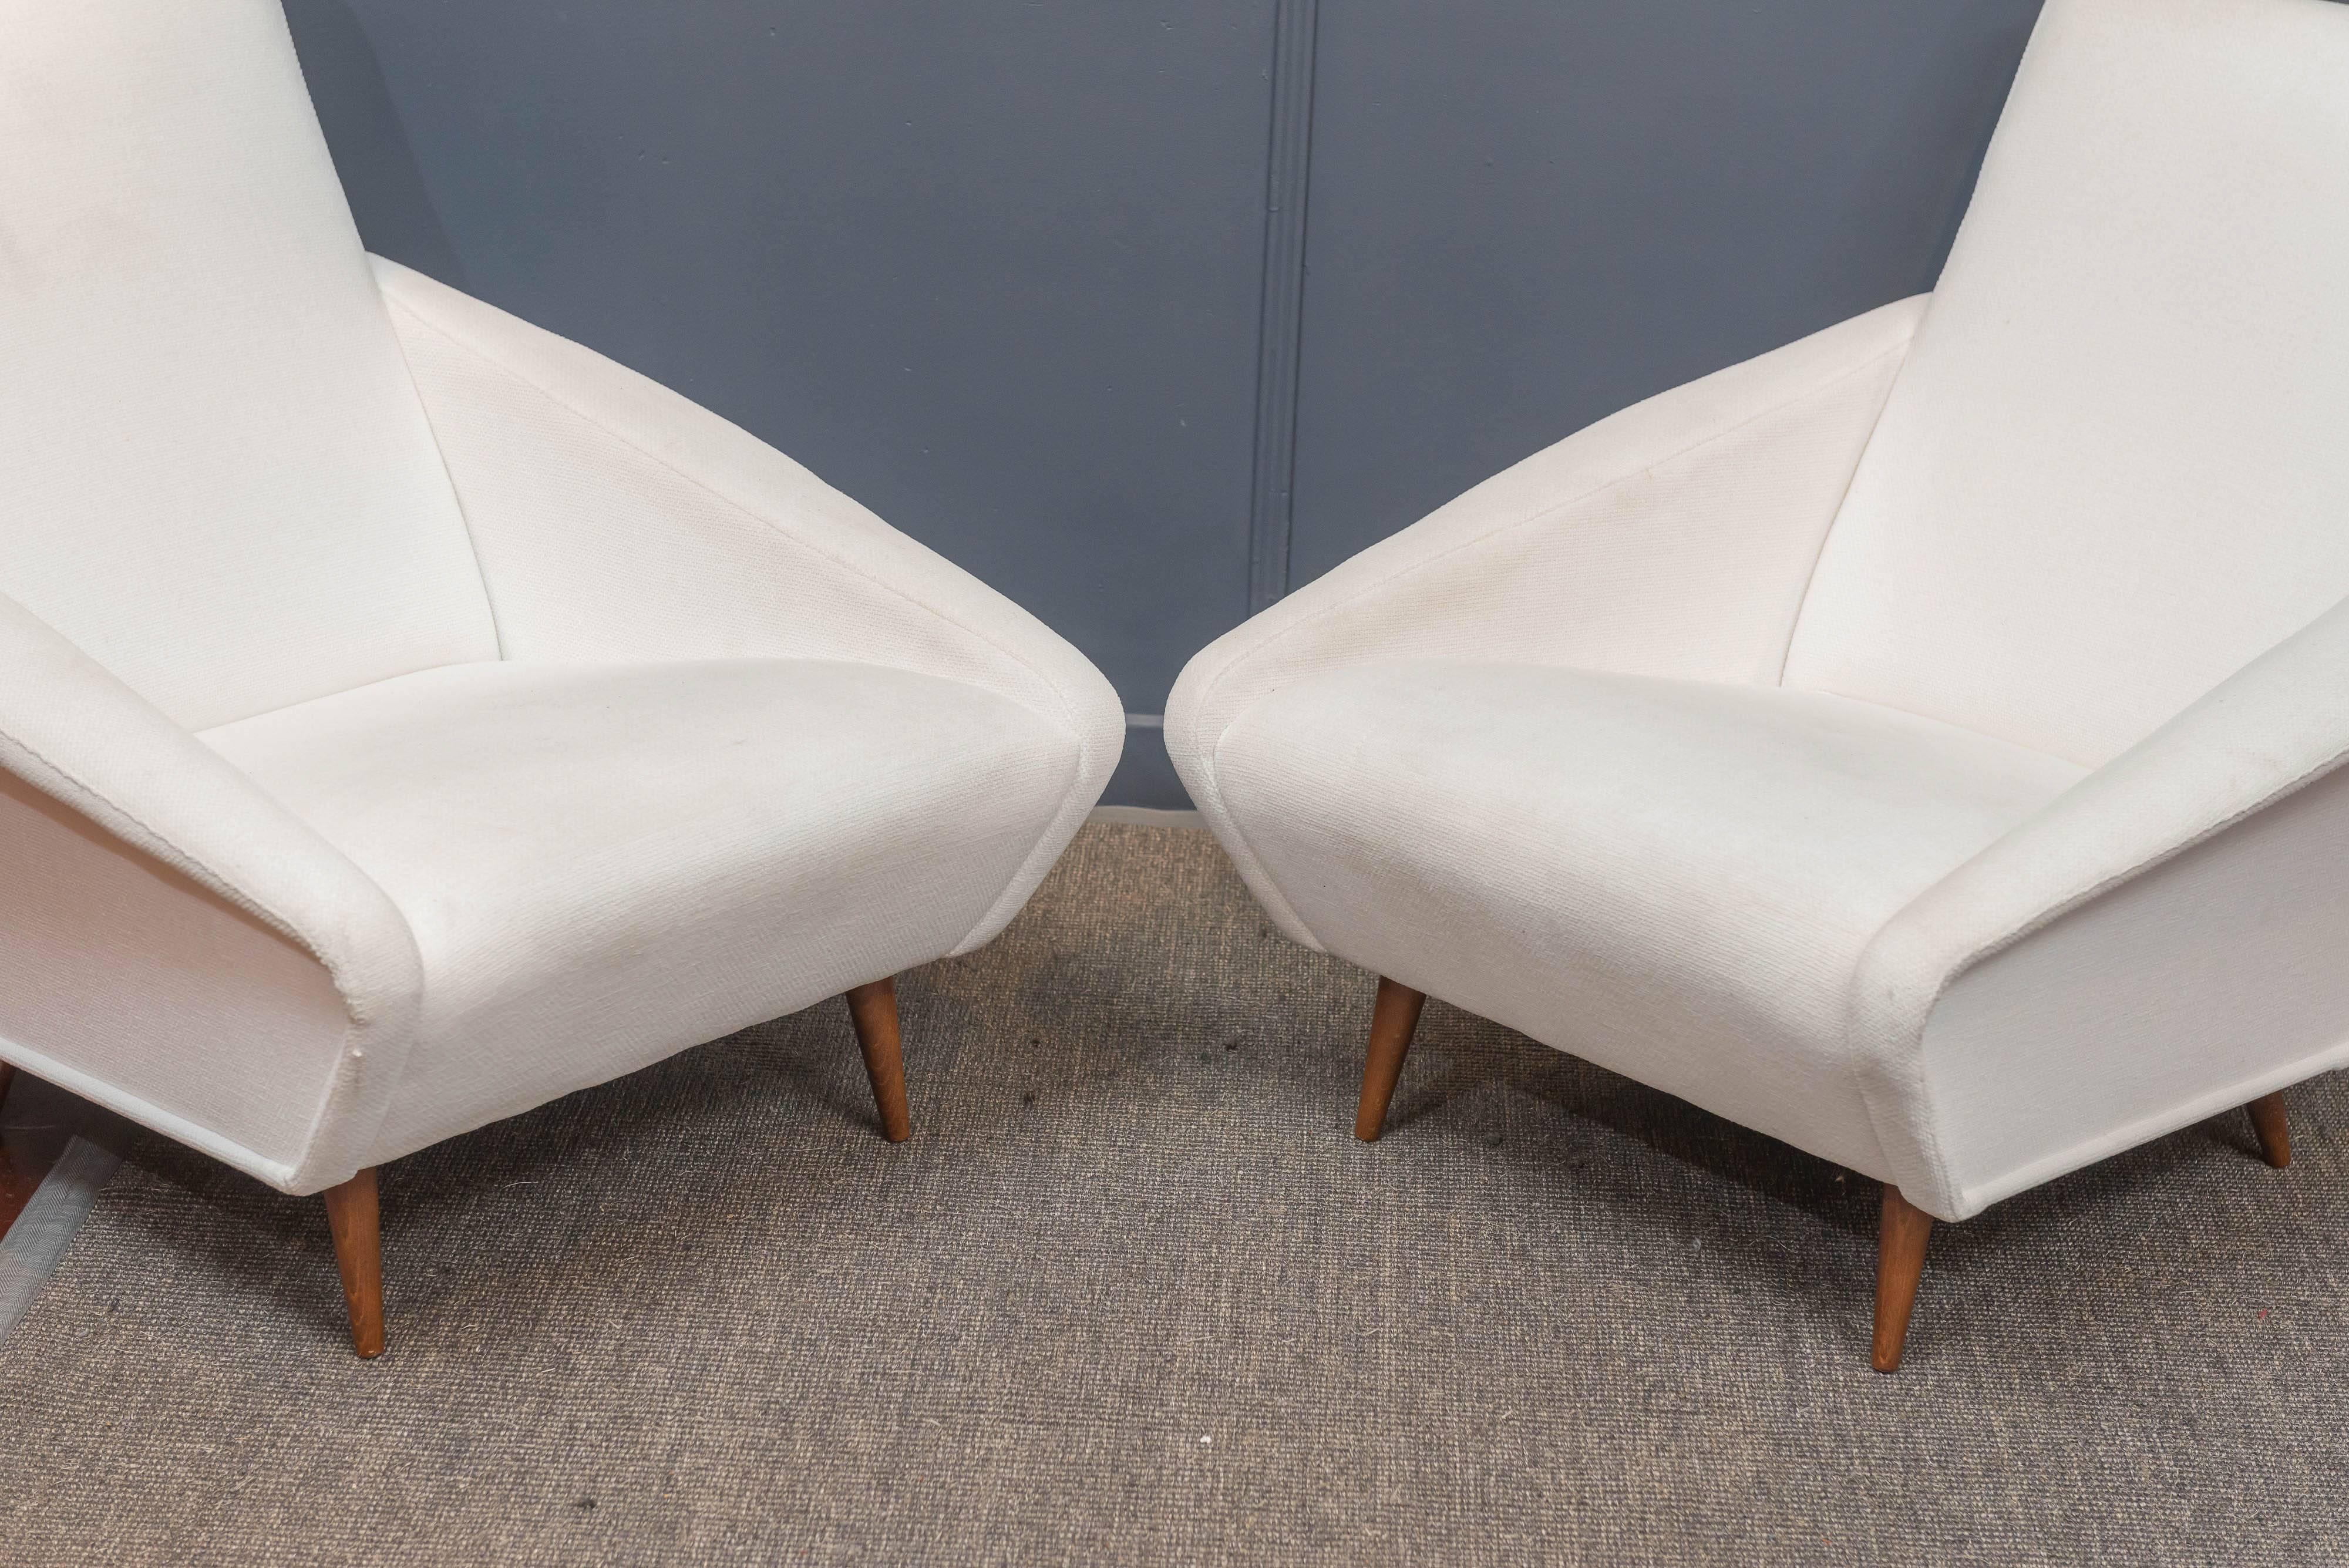 Rare original pair of Gio Ponti style lounge chairs.
Upholstered in a woven cotton five years ago that is usable as-is or could be re-done to your specifications.
Structurally sound and super comfy.